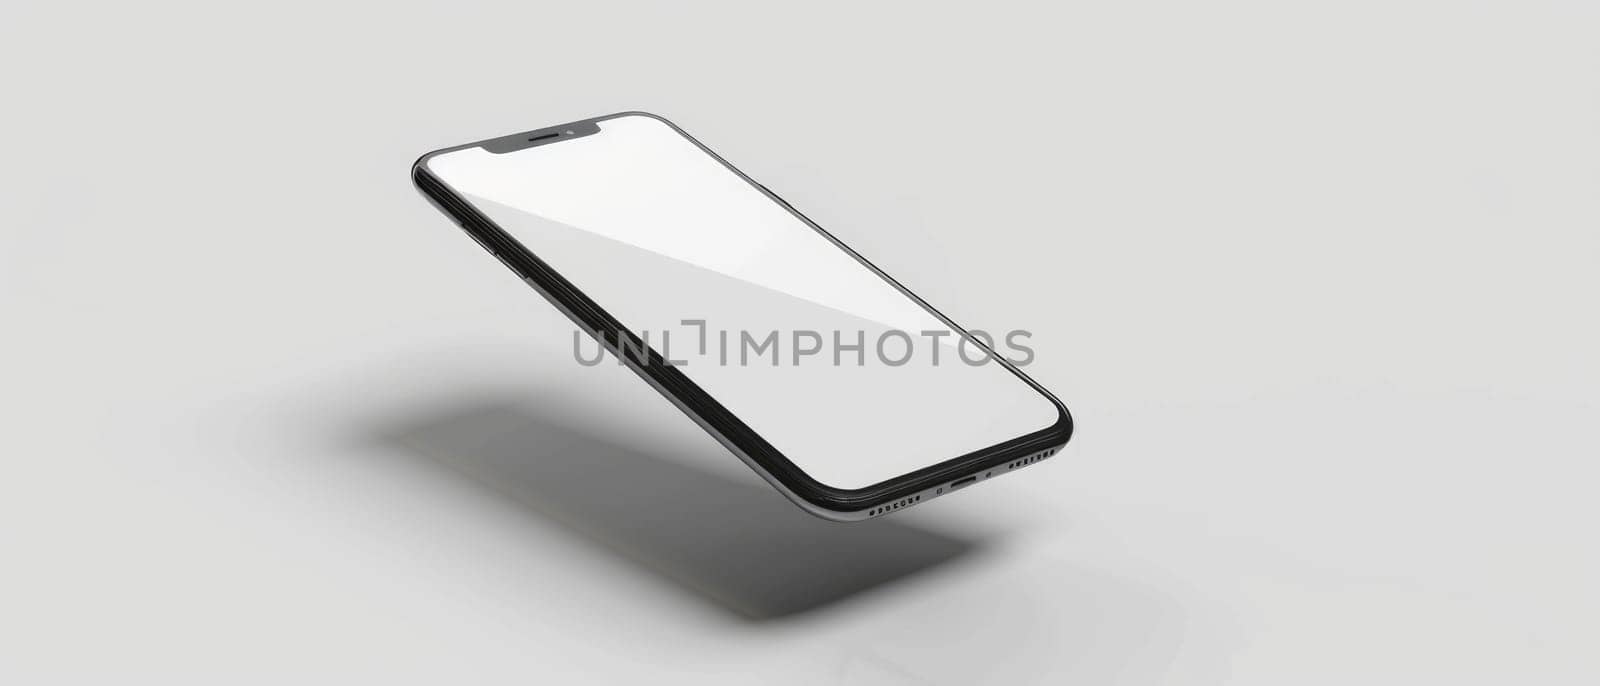 A phone is shown in a white background with a clear screen by AI generated image.